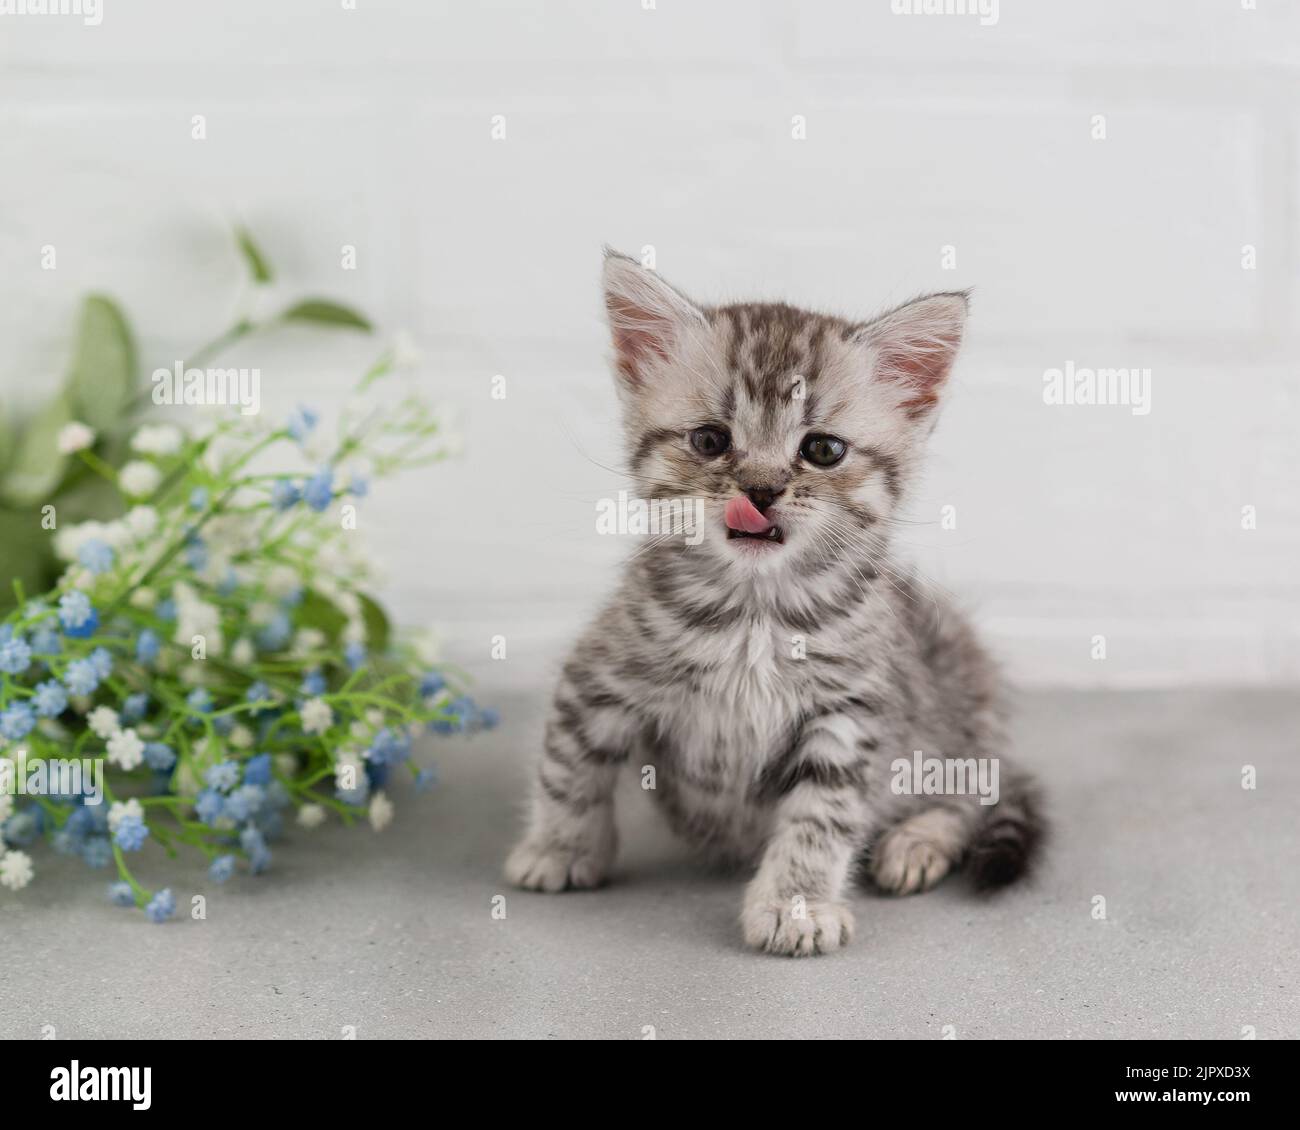 A small striped gray-white kitten sits on the floor and looks at the camera. Licking his lips. Pink tongue. Selective focus Stock Photo